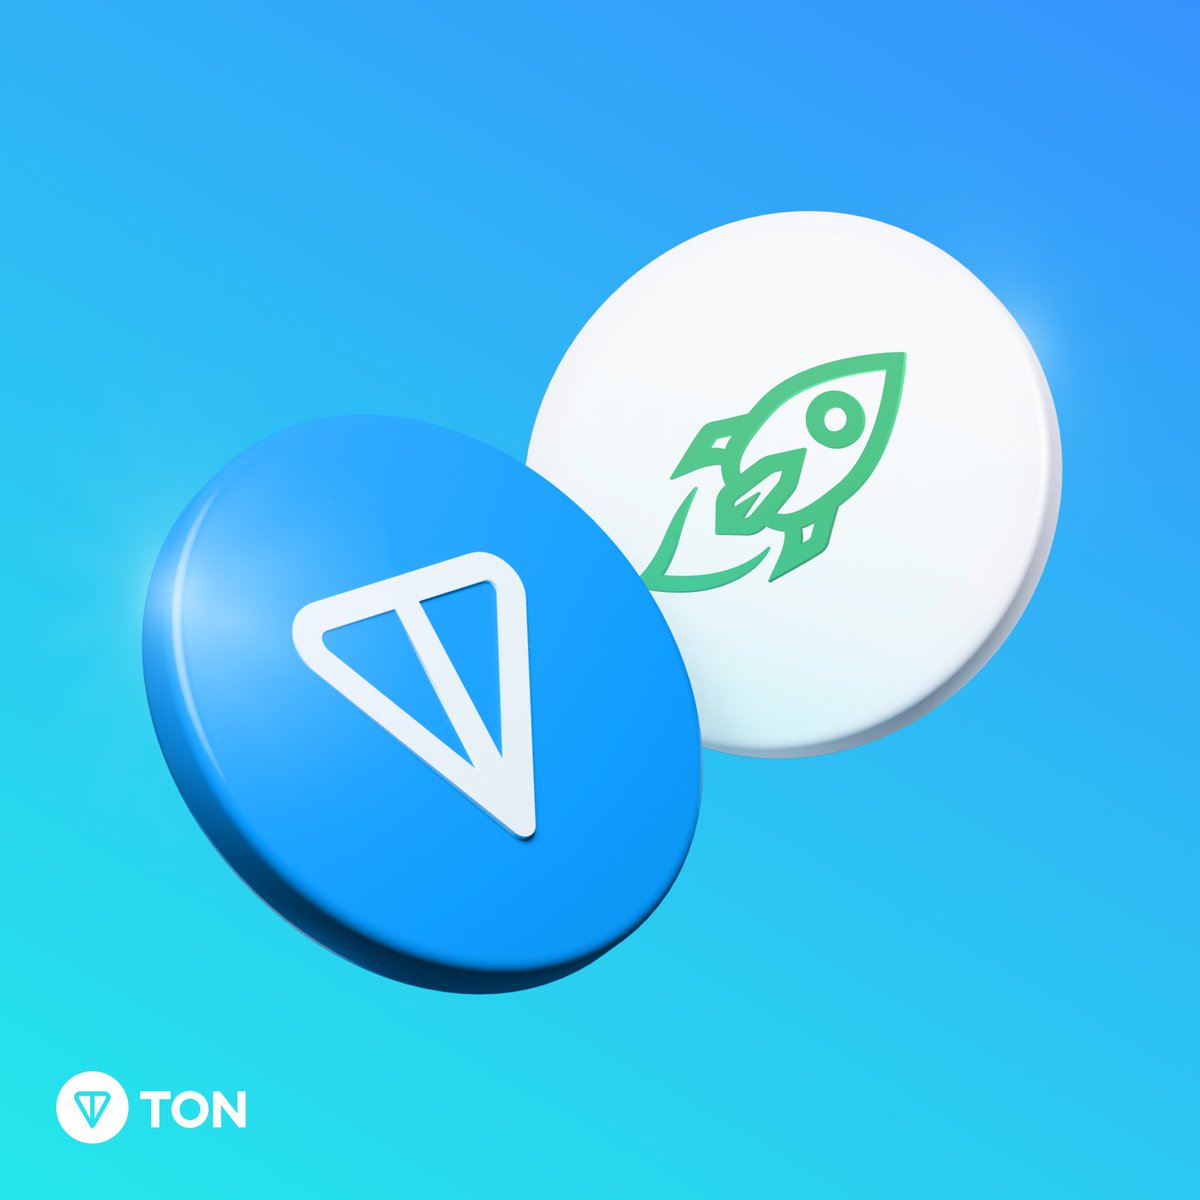 💎 TON x @Changelly_team 💎 Changelly has launched The 𝐏𝐫𝐨𝐛𝐚𝐛𝐥𝐲 𝐒𝐞𝐫𝐢𝐨𝐮𝐬 𝐐𝐮𝐢𝐳 to support the launch of $USDt on #TON 🥳 📅 End date: 7 May 🔗 cointelegraph.com/partnership/st… -> Complete the quiz -> Enjoy 0% service fee for USDt on TON & Toncoin swaps with Changelly.